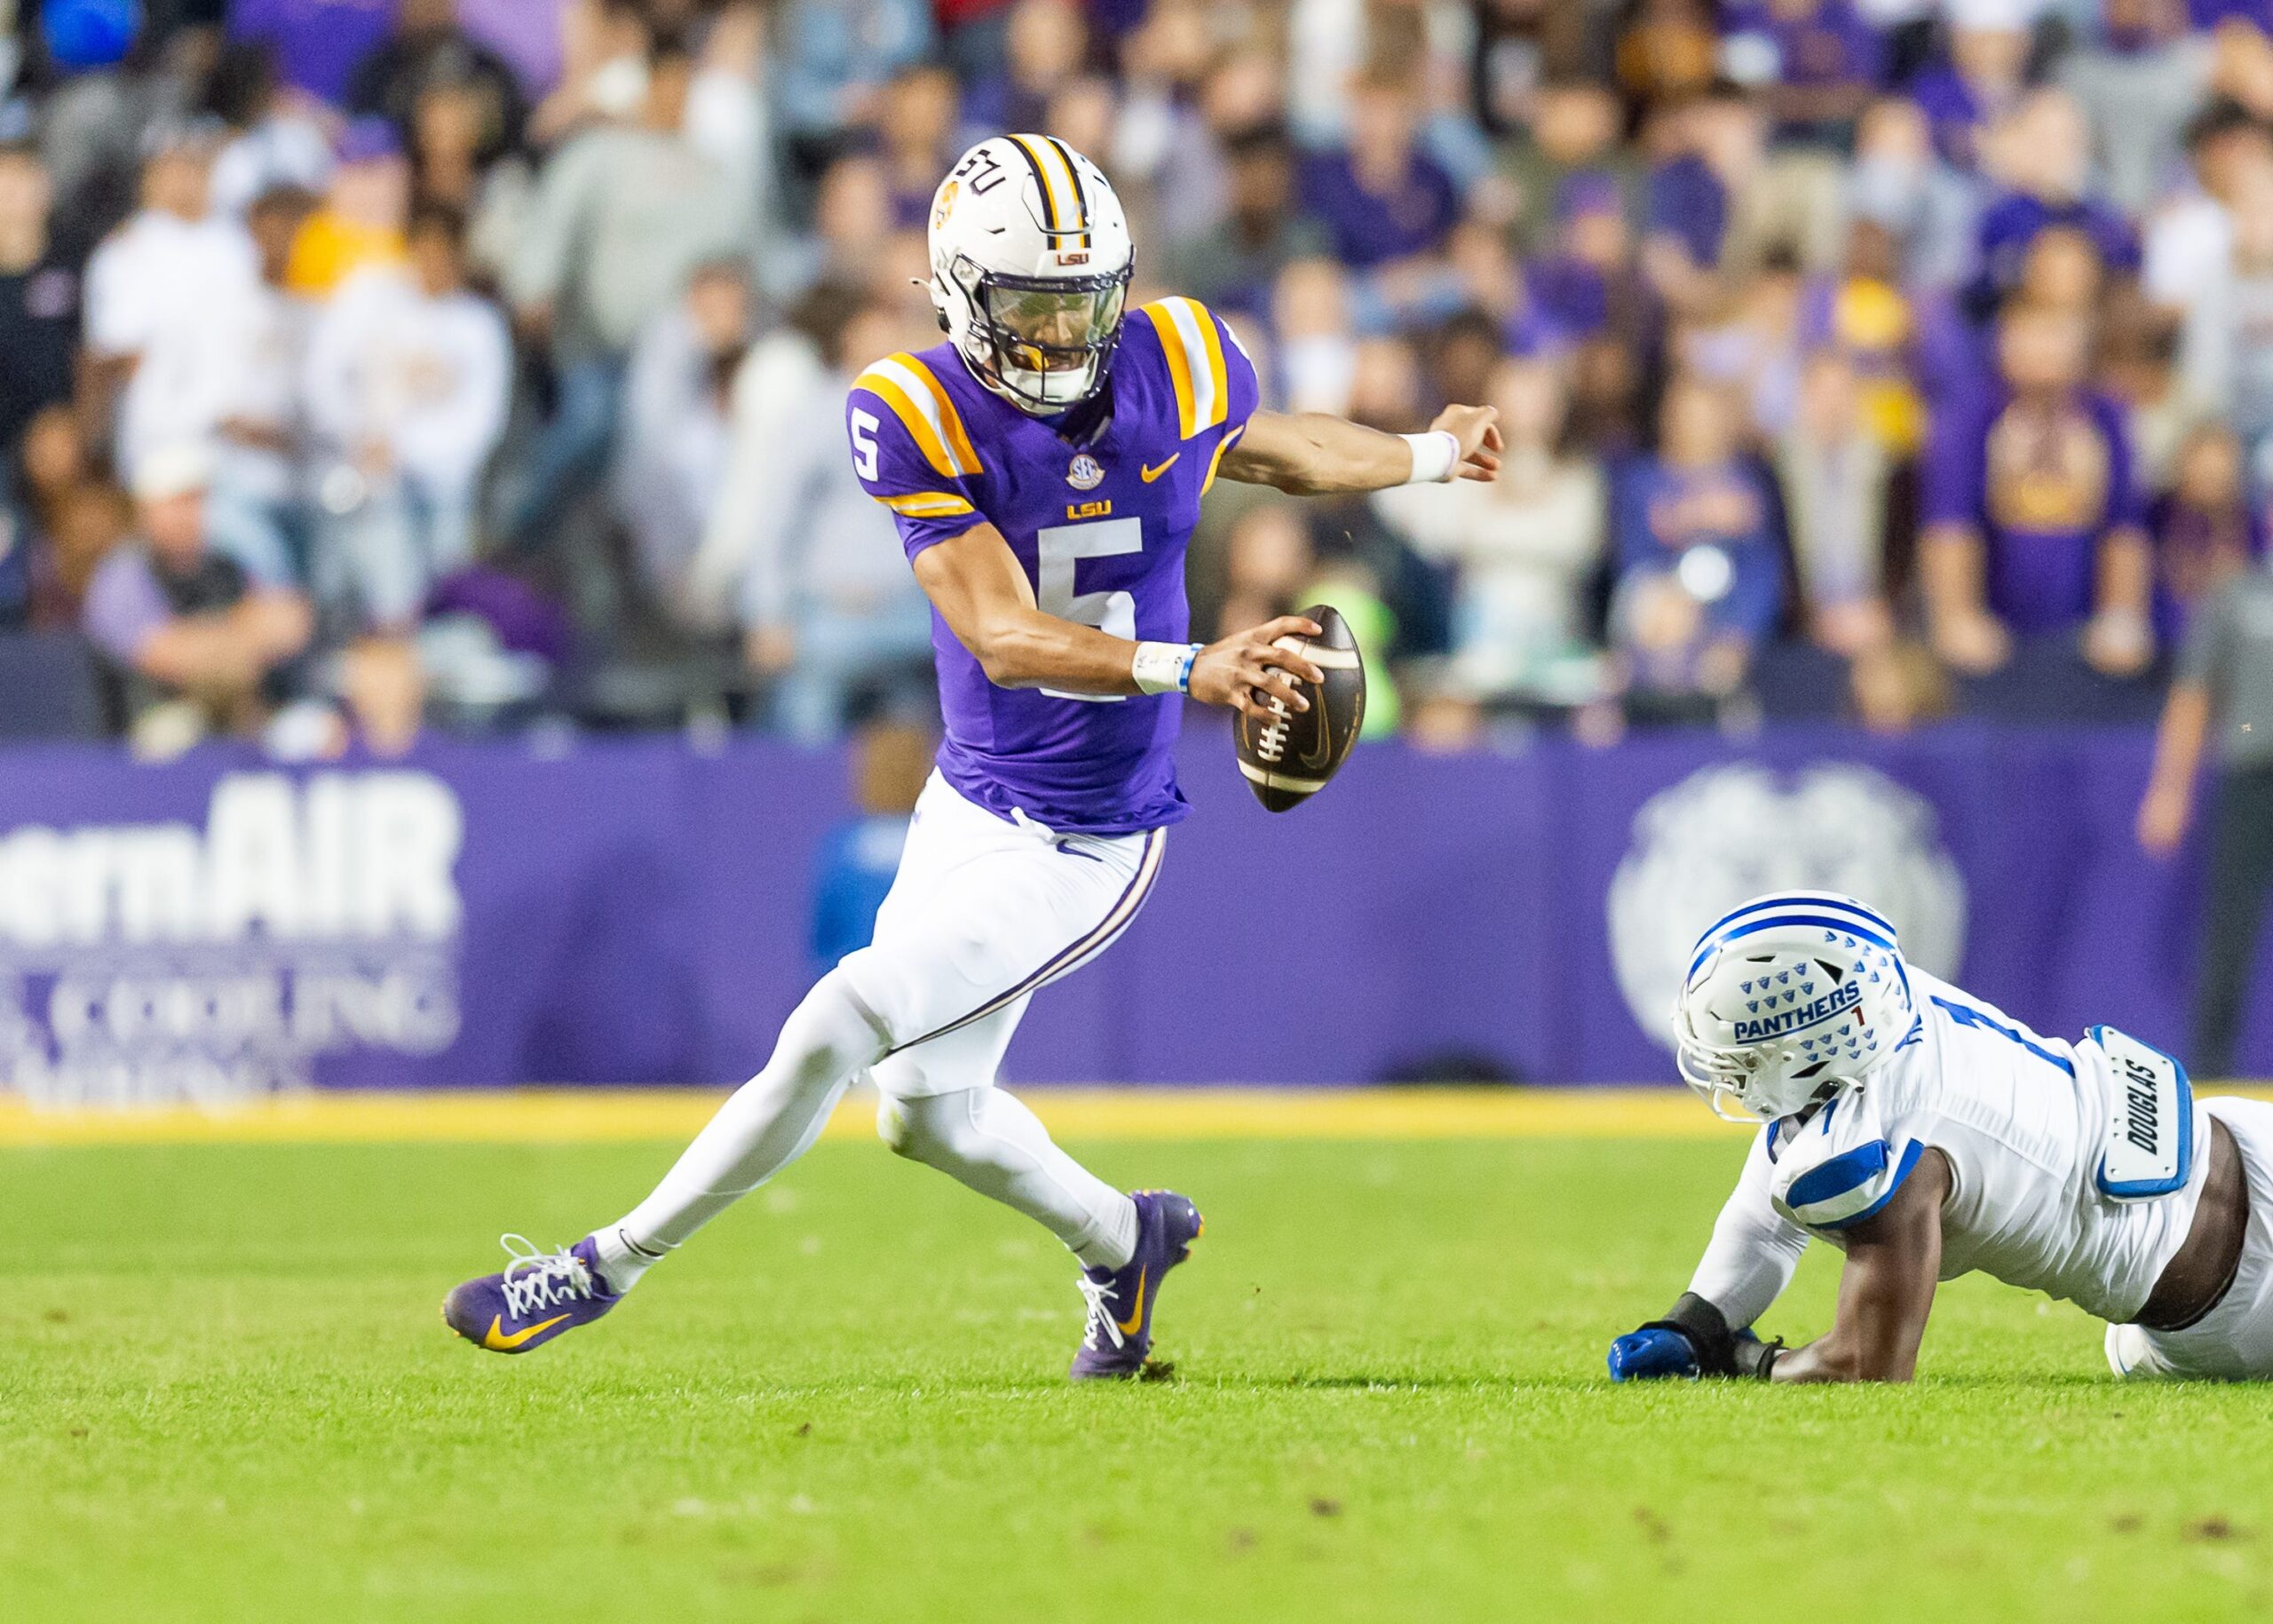 Quarterback Jayden Daniels 5 runs the ball as the LSU Tigers take on Georgia State in Tiger Stadium in Baton Rouge, Louisiana, November 18, 2023. (Scott Clause/USA TODAY Network)